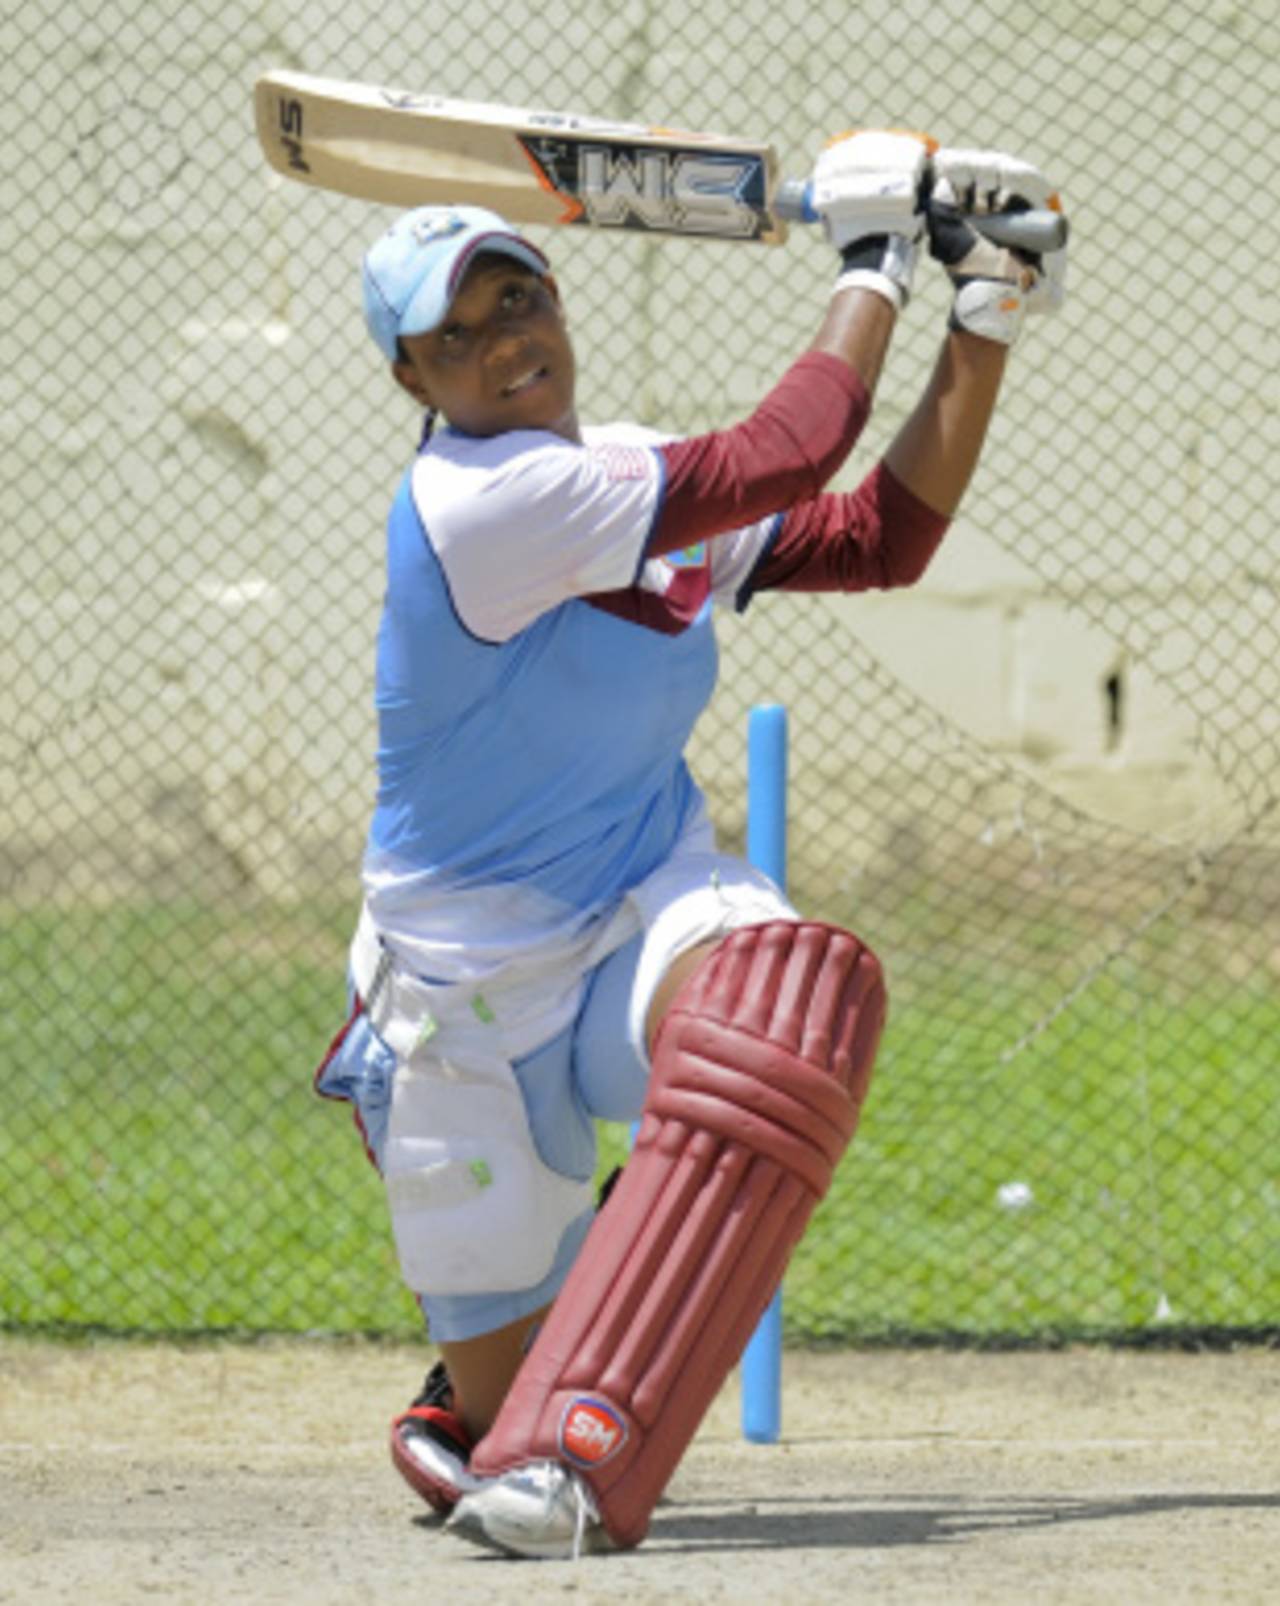 Natasha McLean plays an attacking stroke in the nets, Basseterre, September 1, 2014